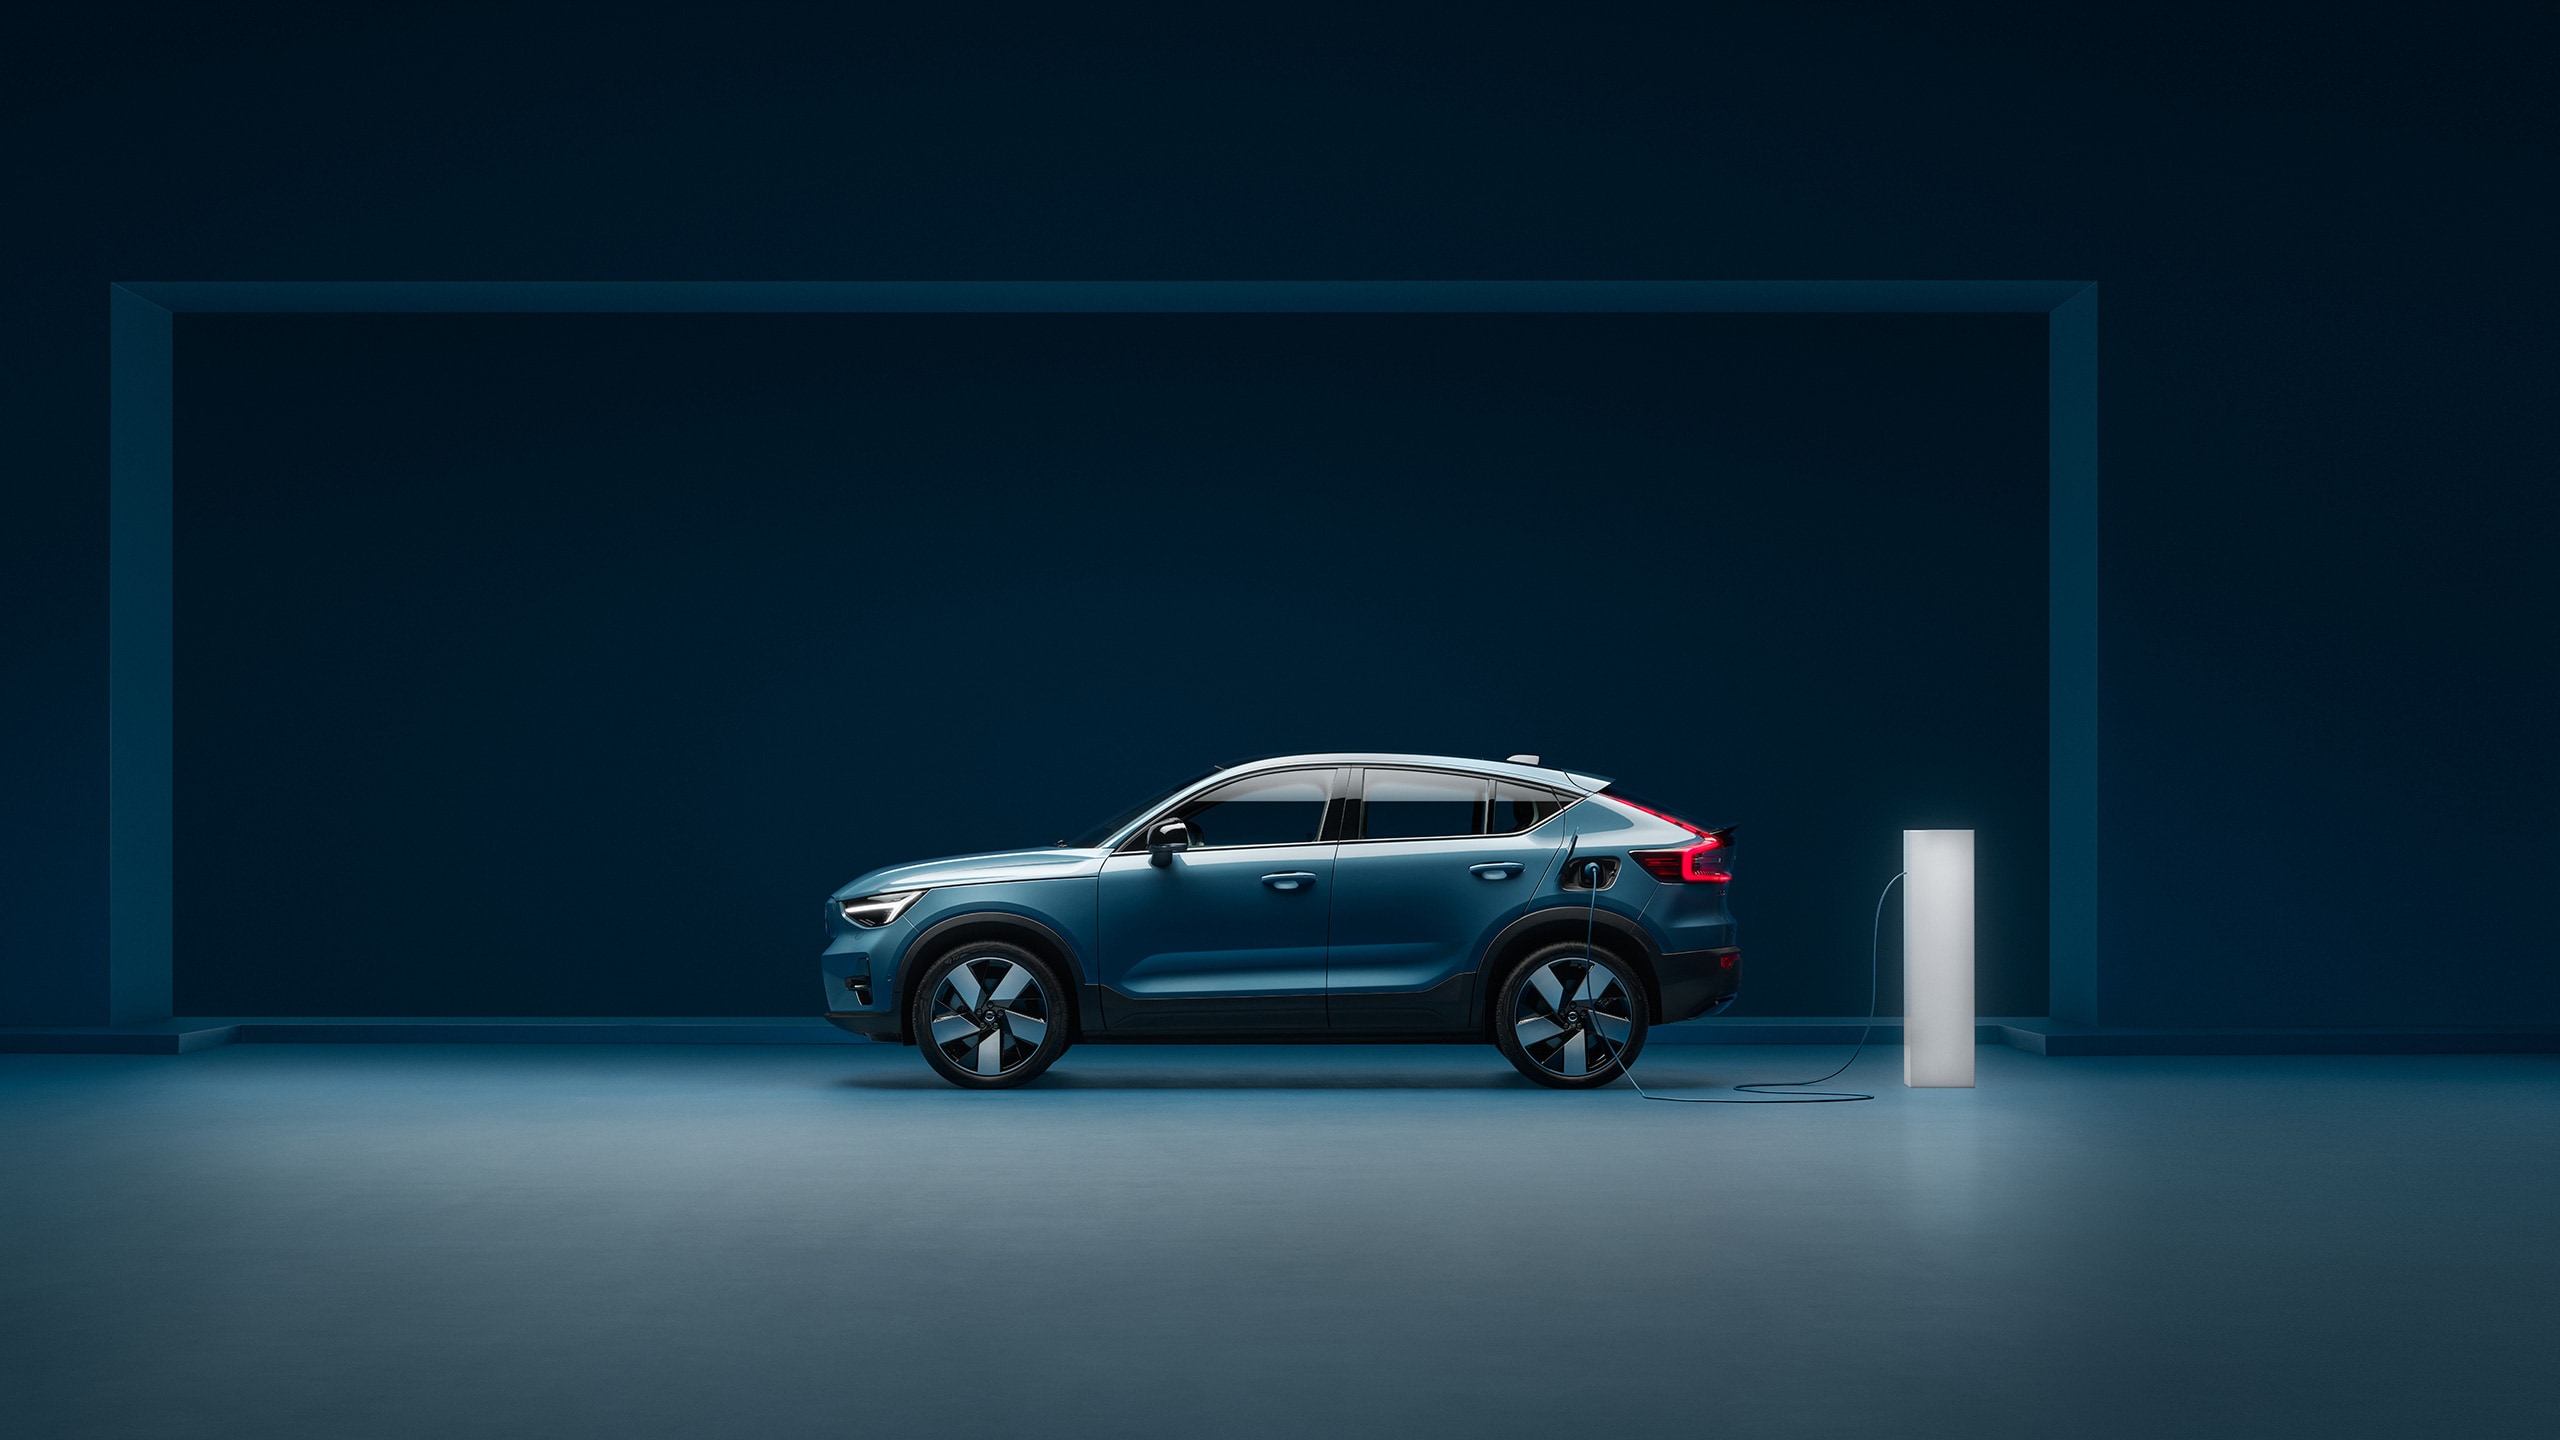 The side profile of a Volvo XC90 Recharge plug-in hybrid SUV.